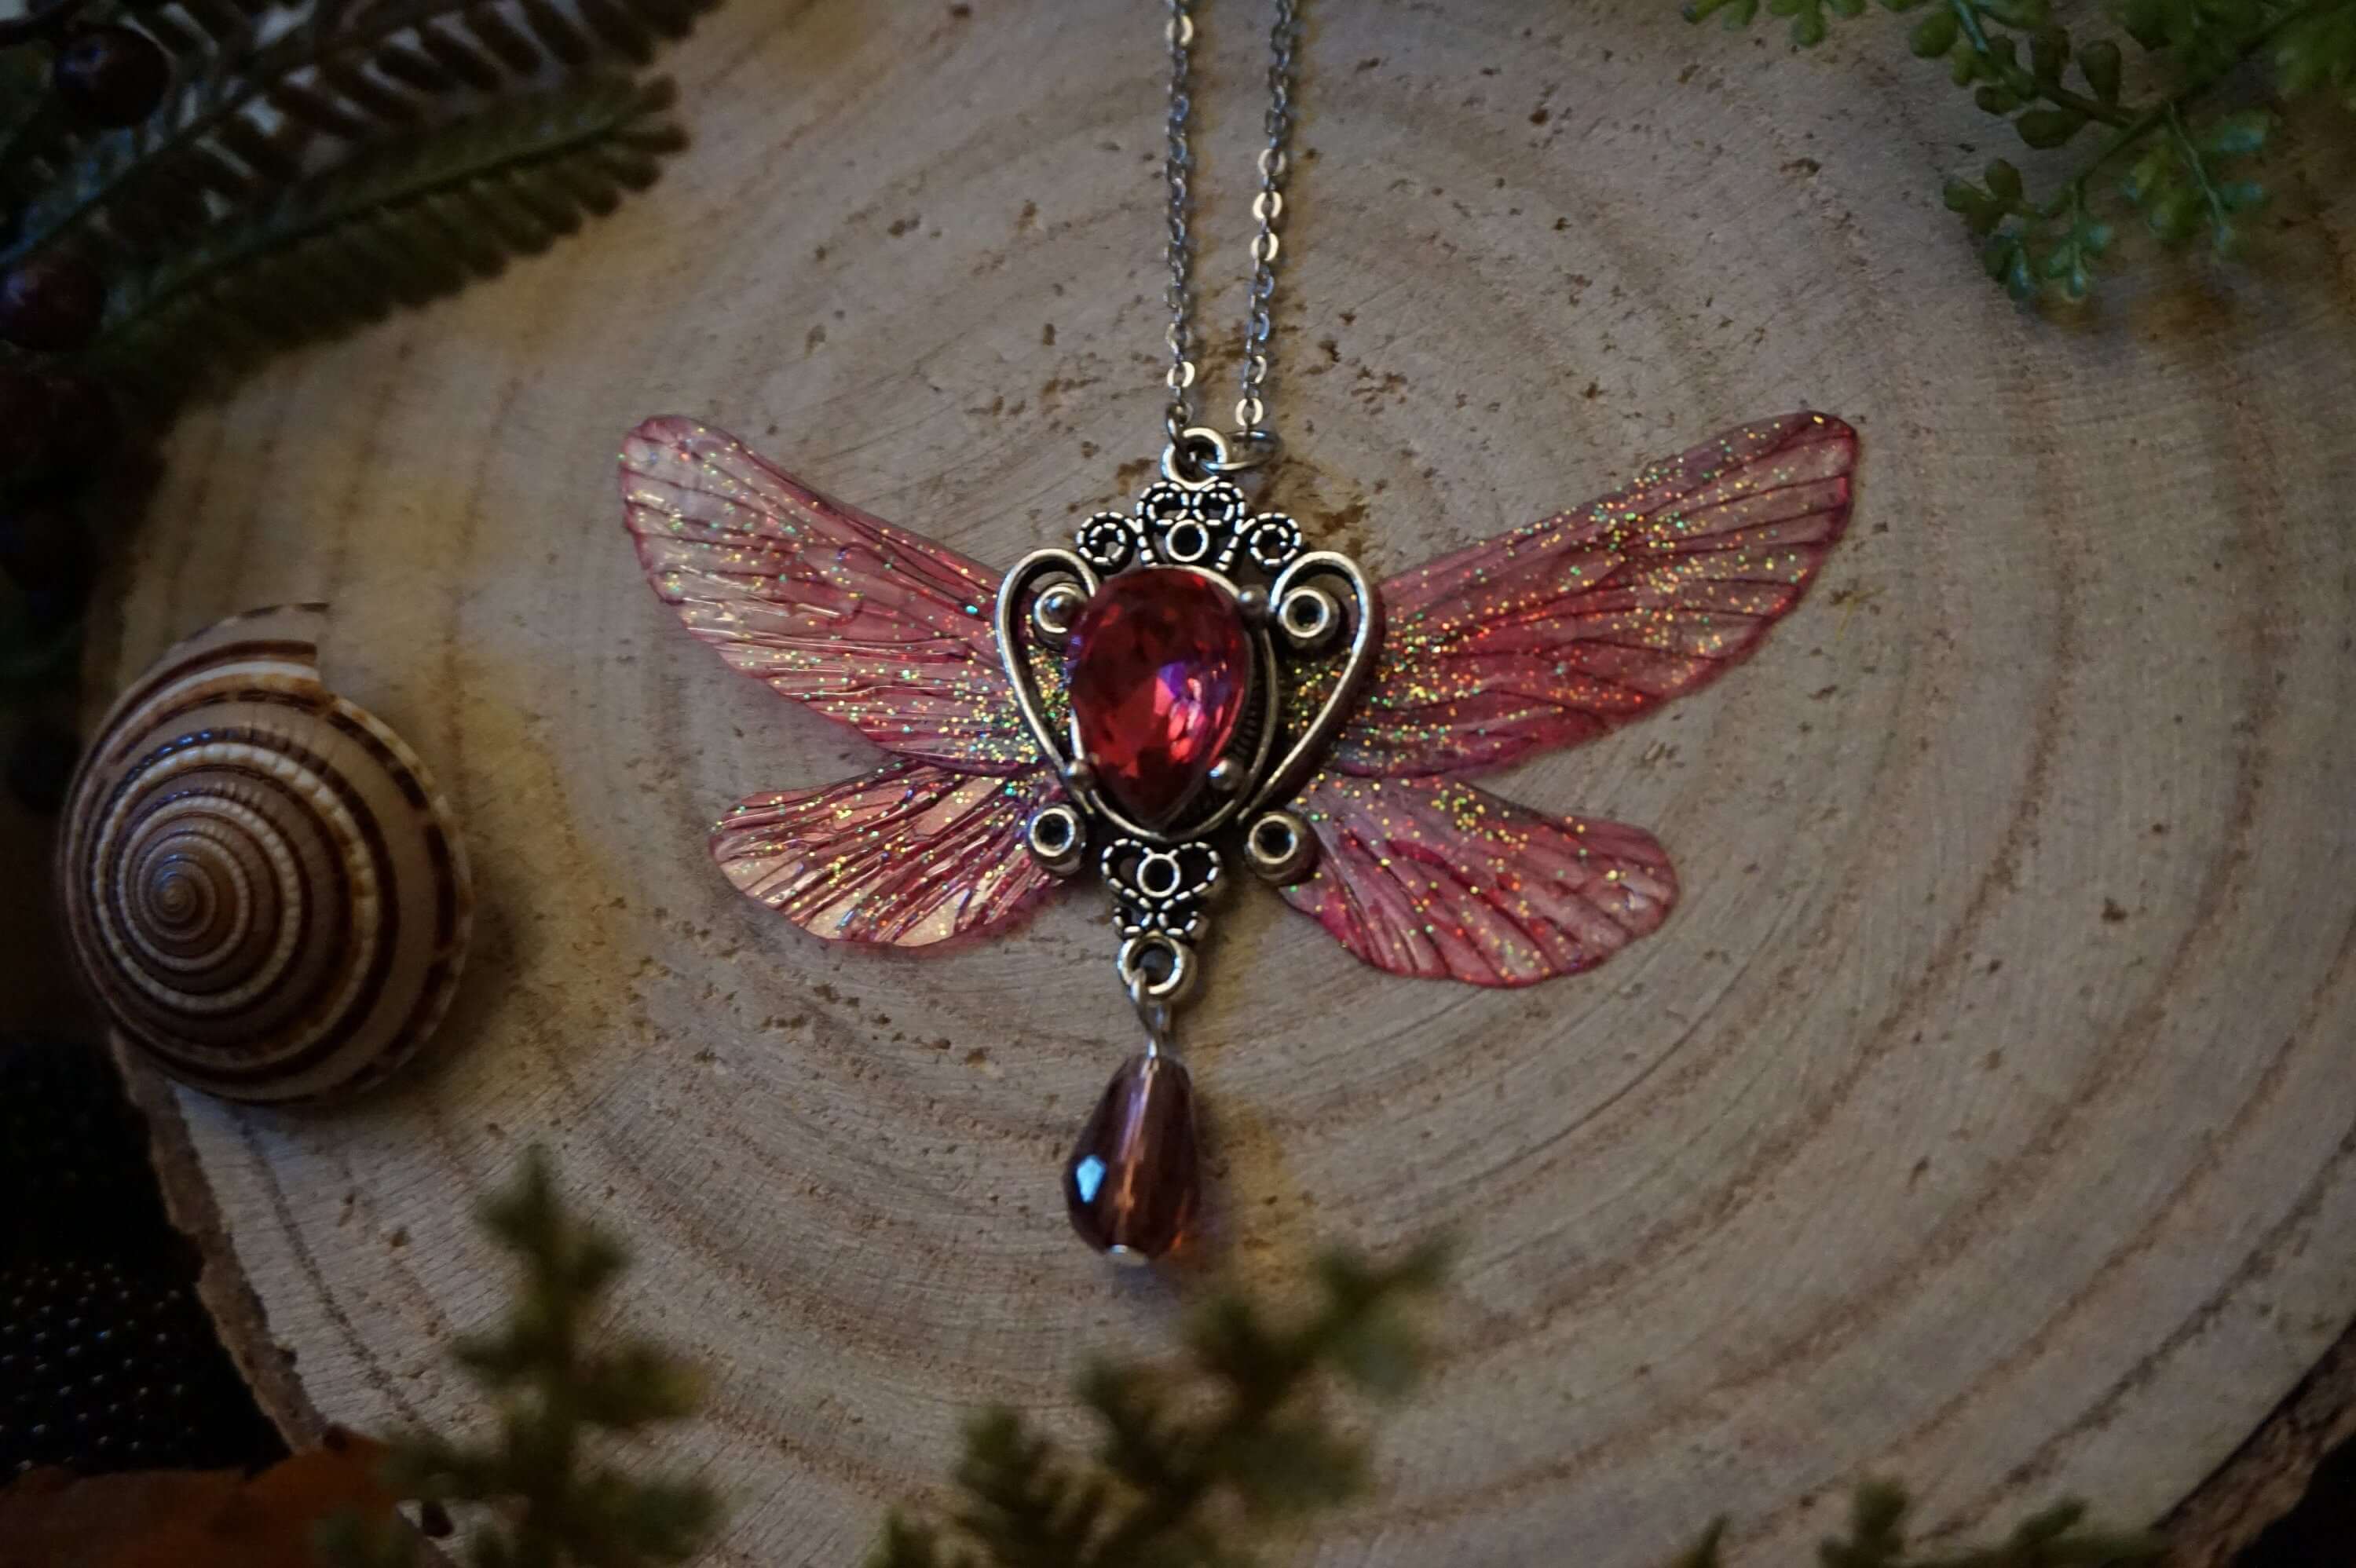 Whimsical Pixie necklace "Flower Faerie"